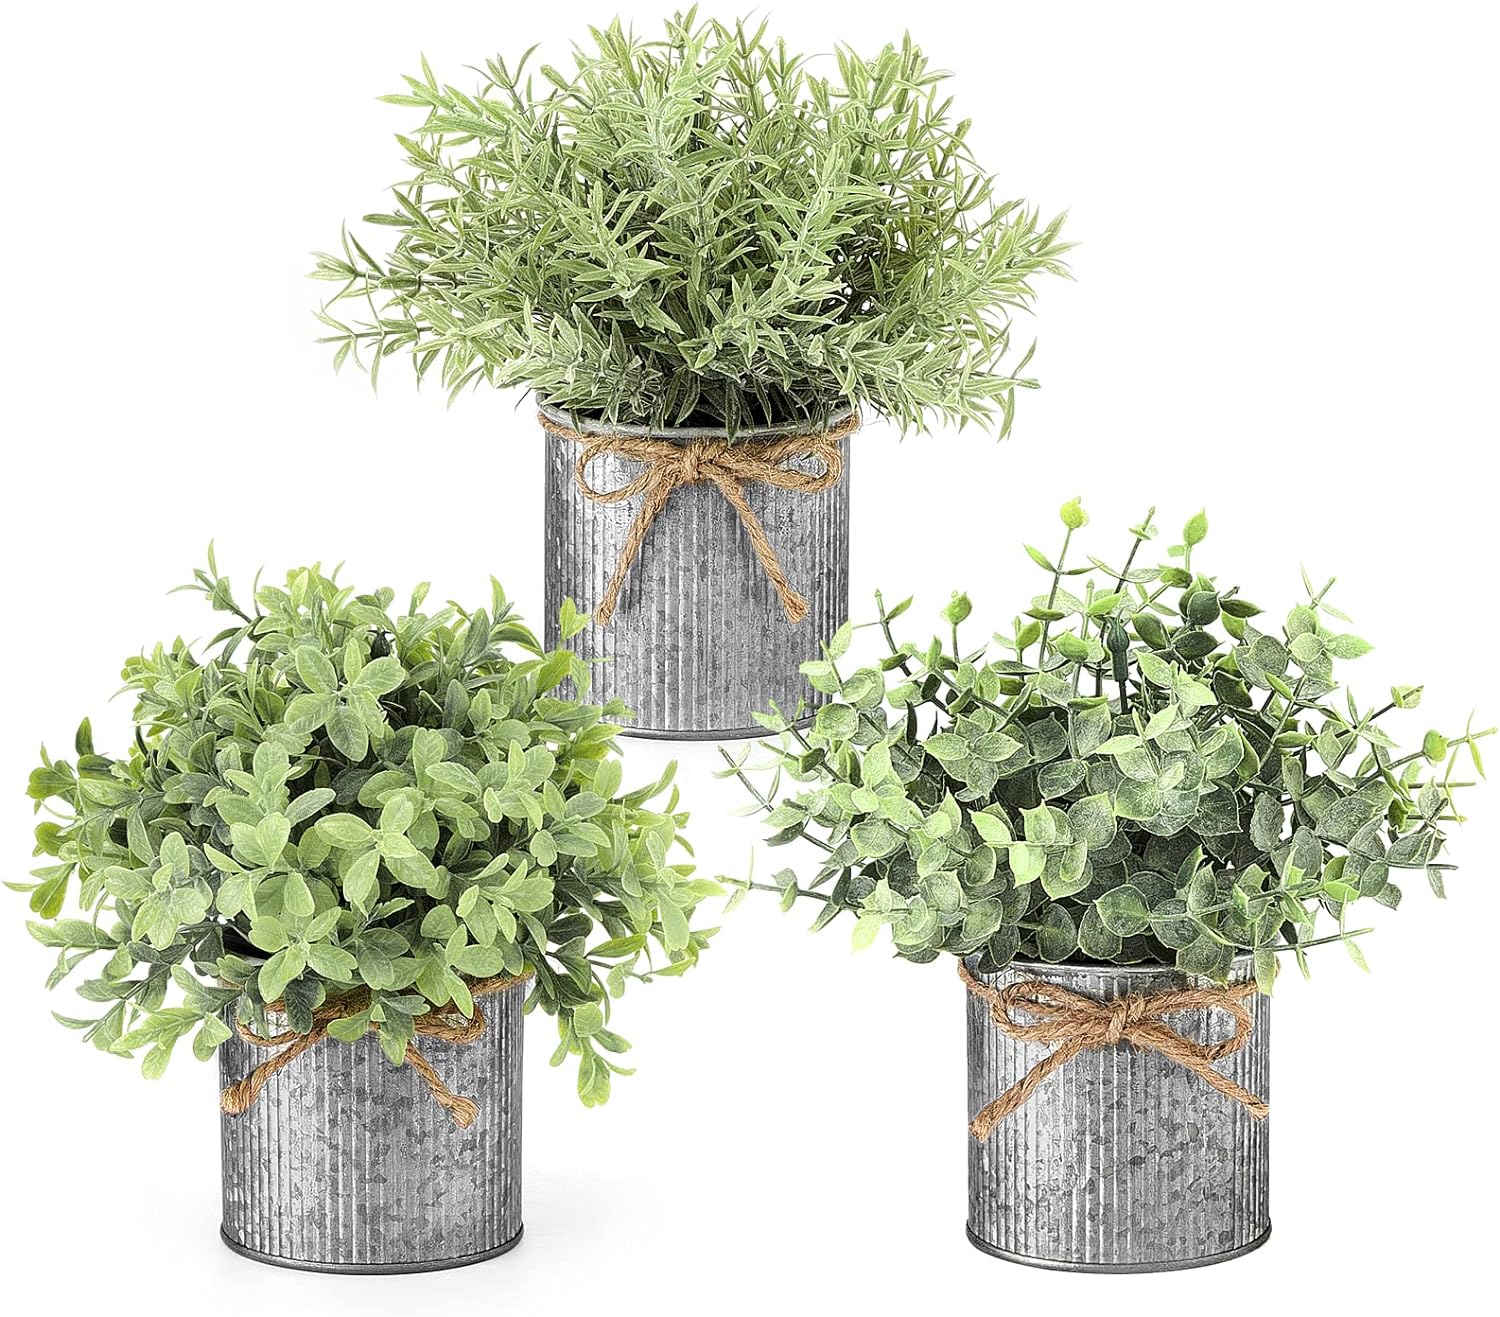 Mkono Fake Plants in Farmhouse Galvanized Pots Table Centerpiece 3 Pack Potted Artificial Plants Faux Eucalyptus for Shelf Office Rustic Home Decor